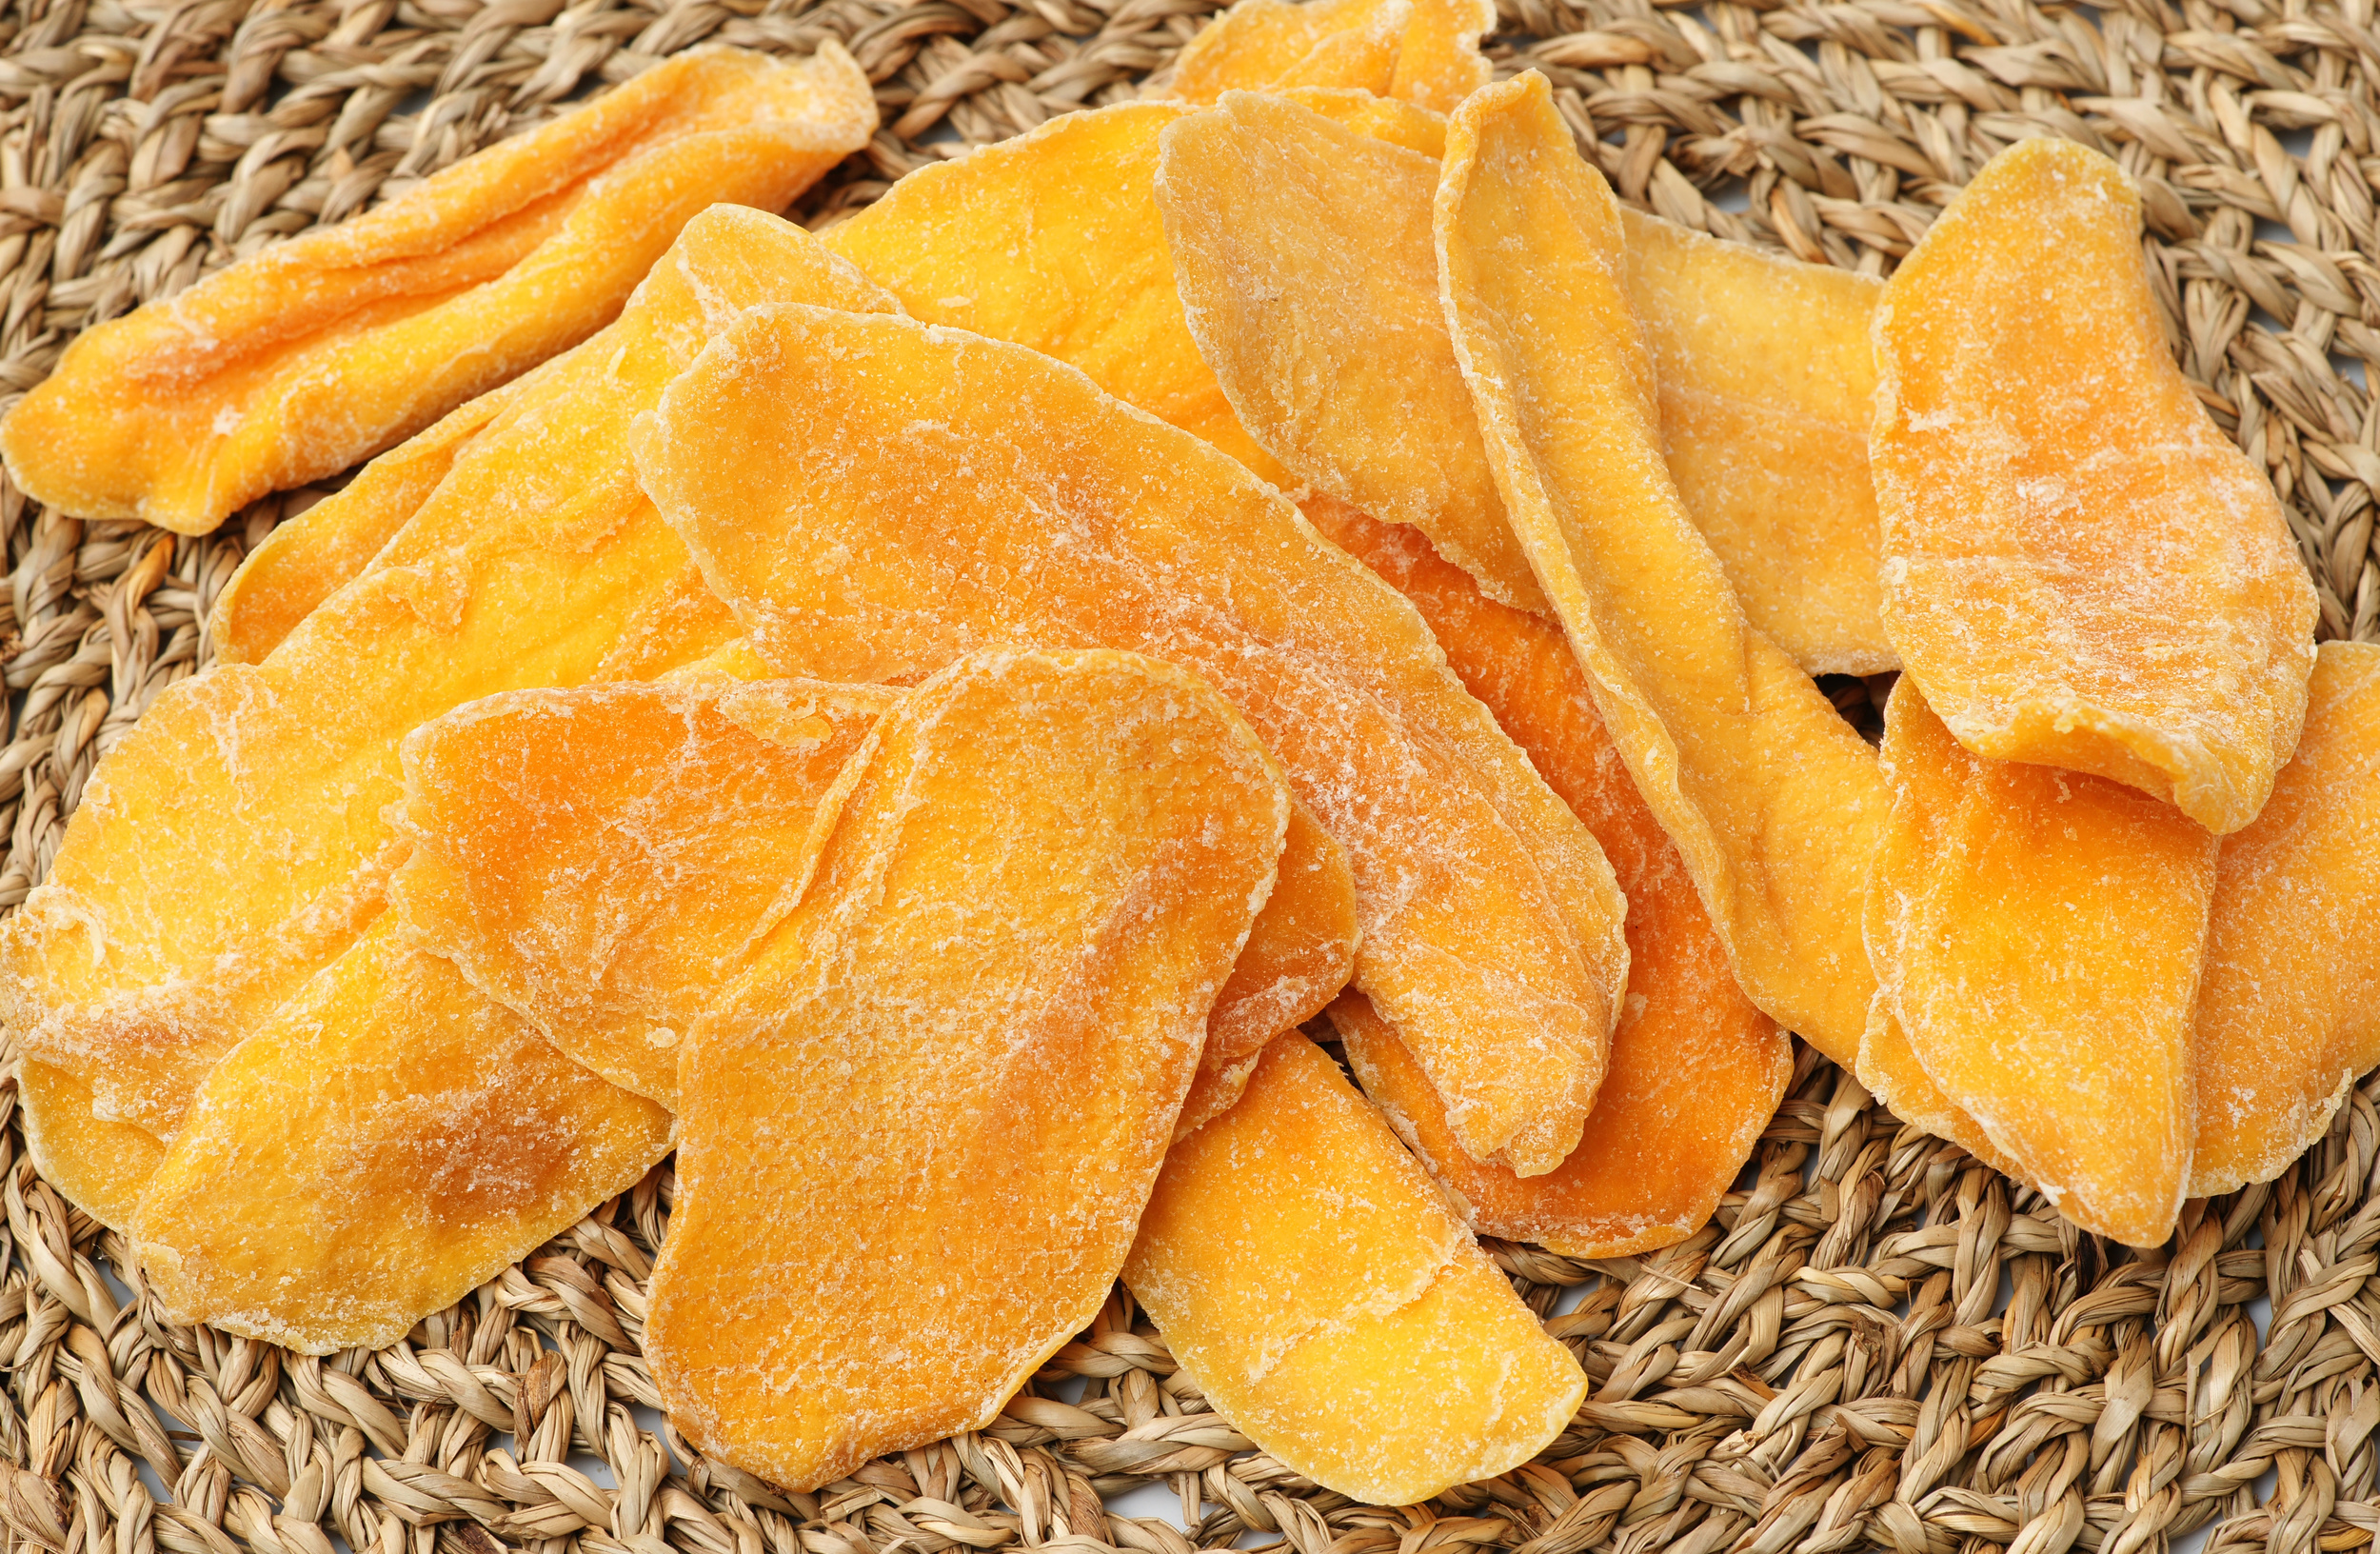 <p>We honestly enjoy dried mango just as much as we enjoy fresh mango—thus, we’re always looking for an excuse to eat it. And as far as excuses go, making a trail mix is an excellent one. The fact that mangoes are also loaded with vitamins, minerals, and antioxidants is a pleasant bonus.</p><p><a href='https://www.msn.com/en-us/community/channel/vid-cj9pqbr0vn9in2b6ddcd8sfgpfq6x6utp44fssrv6mc2gtybw0us'>Follow us on MSN to see more of our exclusive lifestyle content.</a></p>